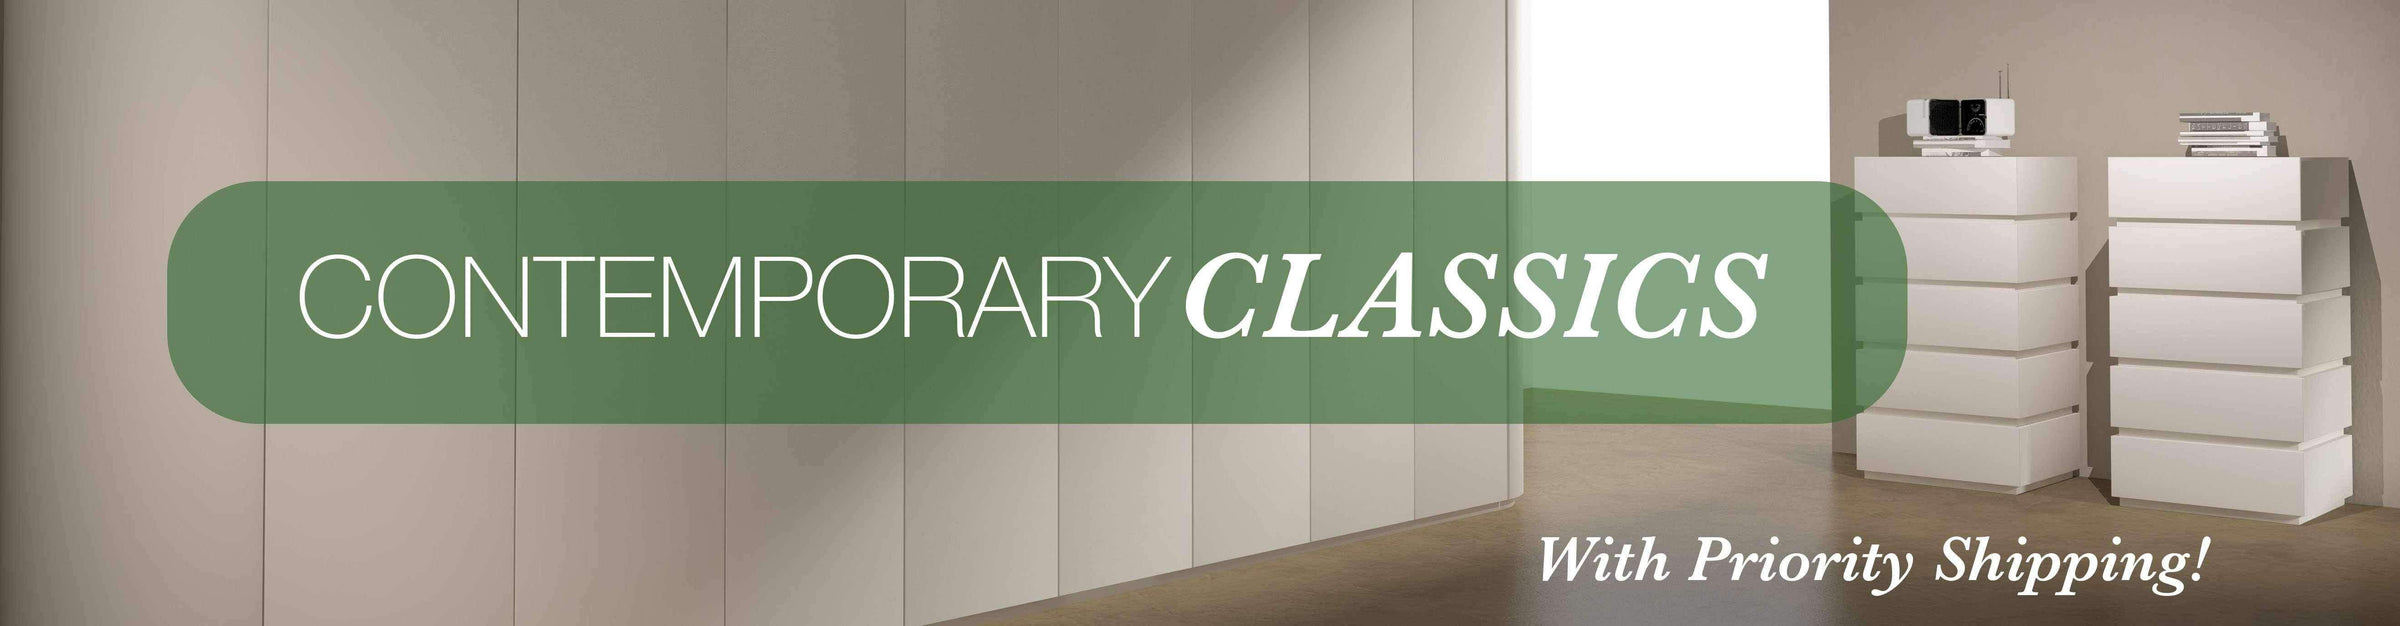 Collections: Contemporary Classics